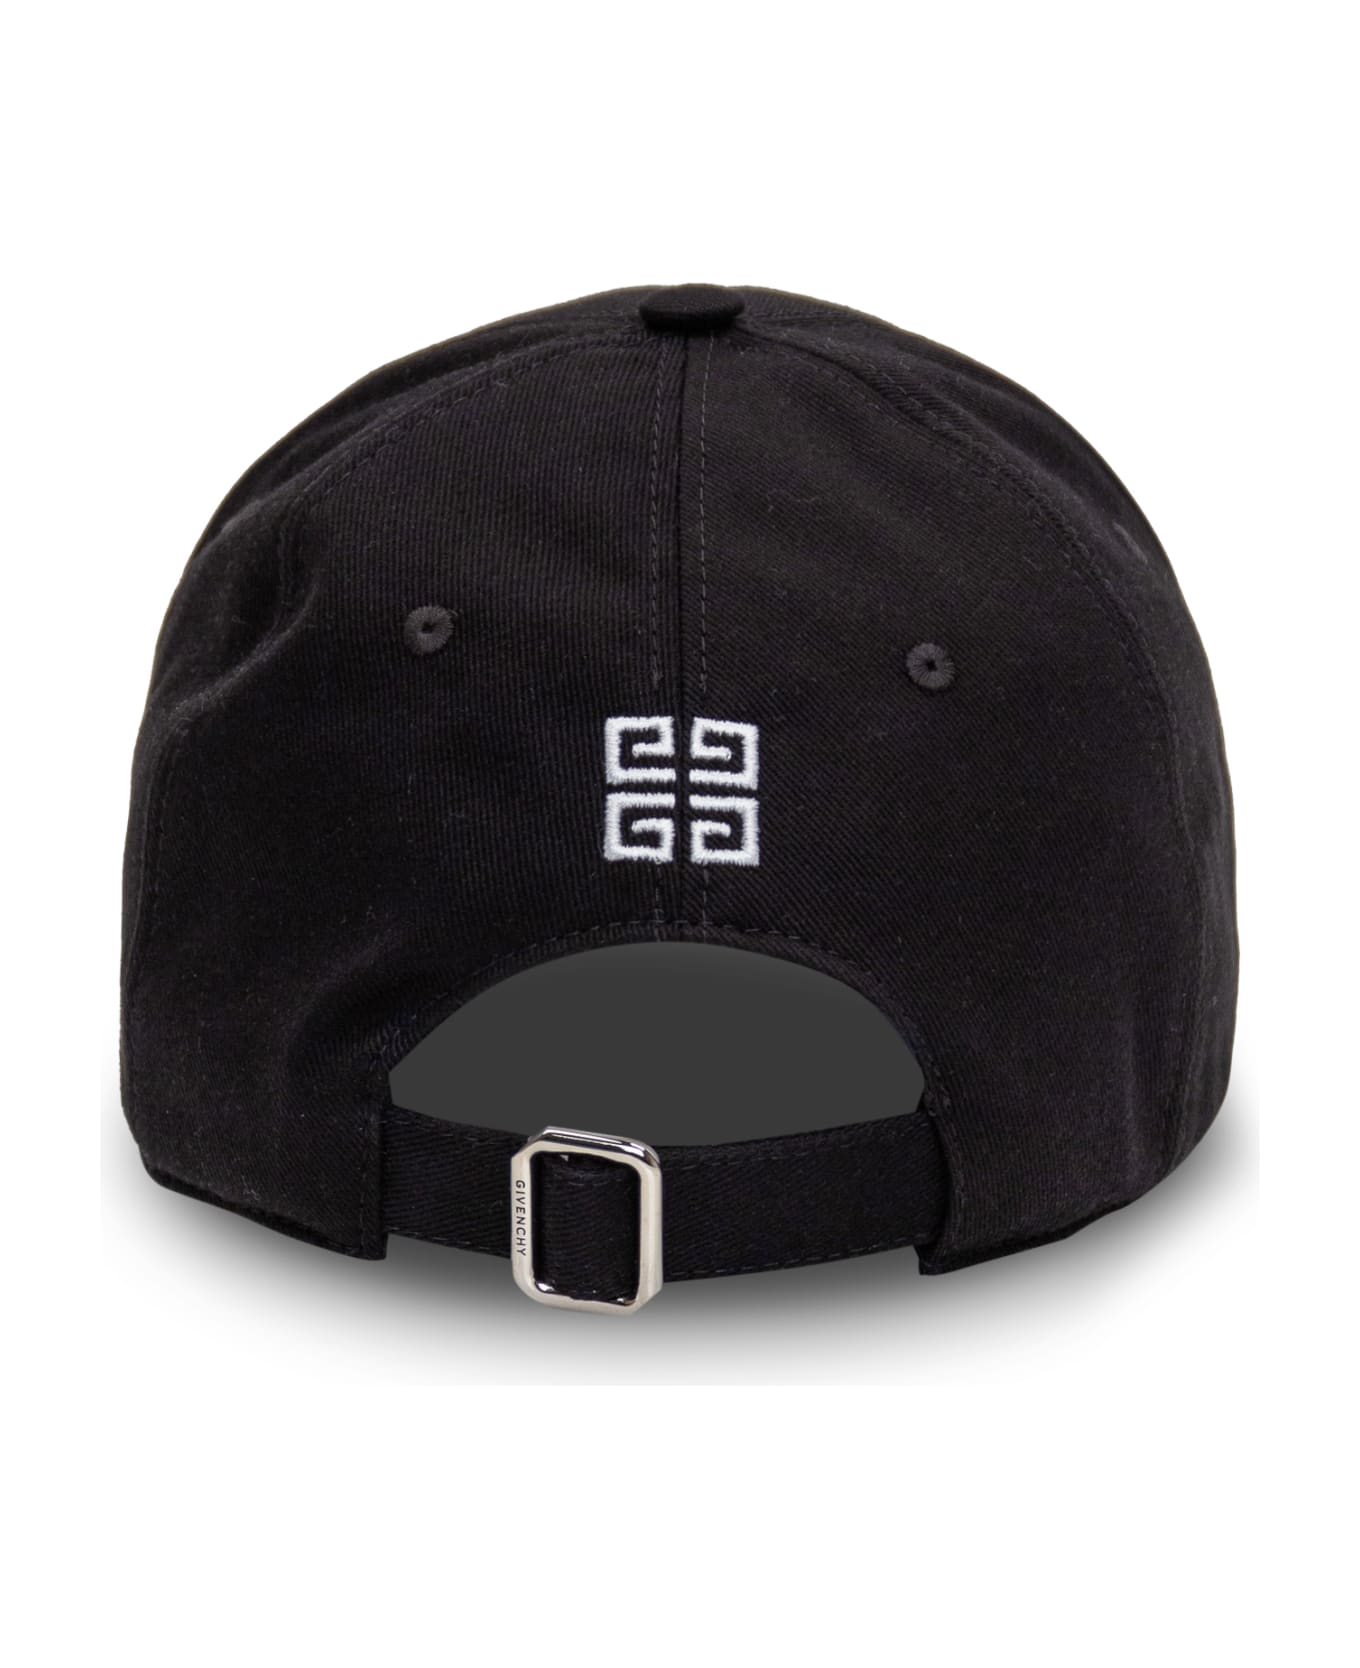 Givenchy Black Baseball Flat hat With Givenchy College Embroidery - Black